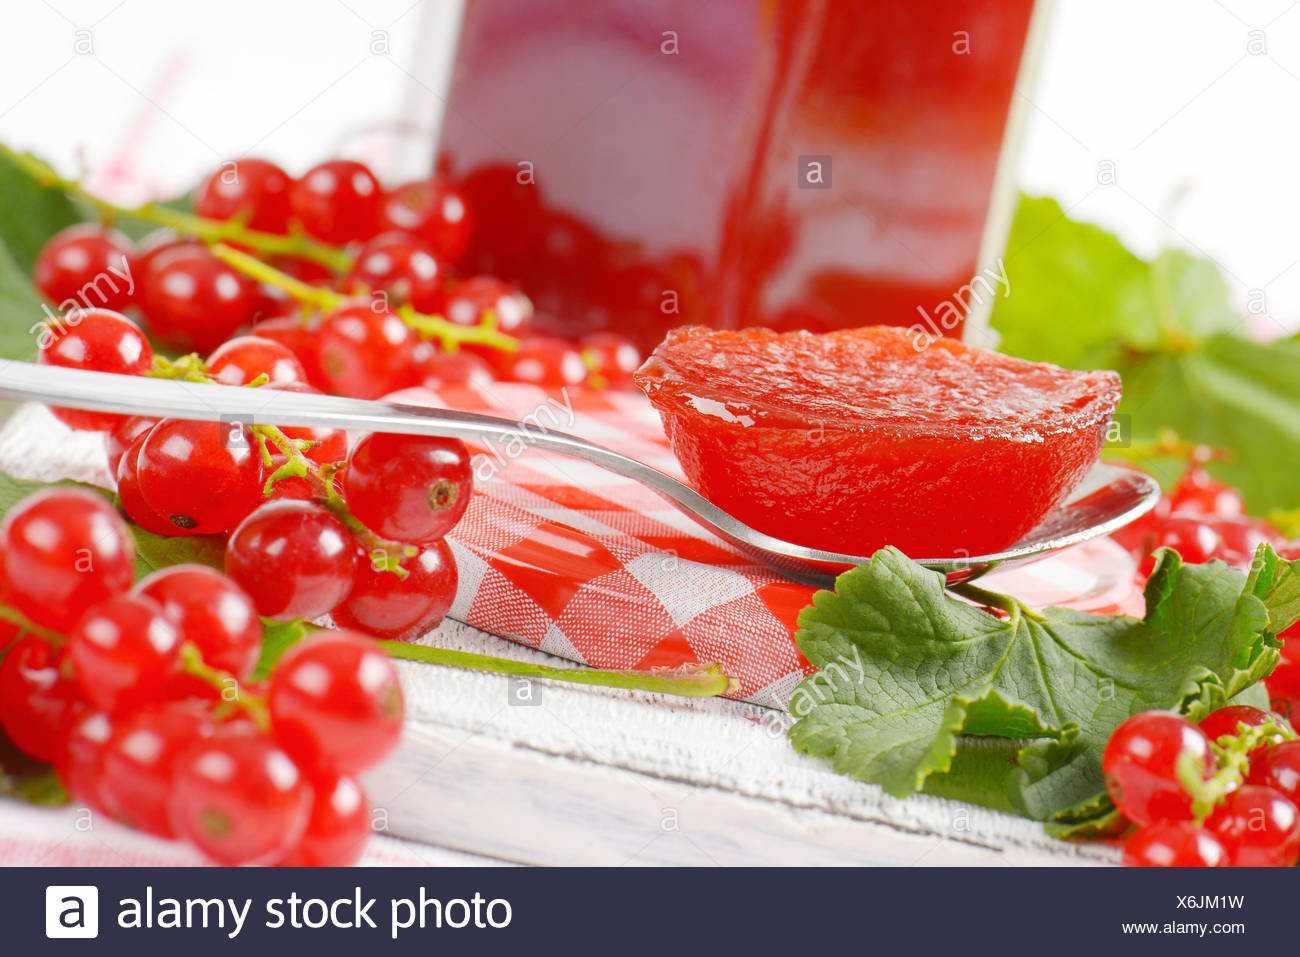 Red Currant Jelly Stock Photo 279464693 Alamy